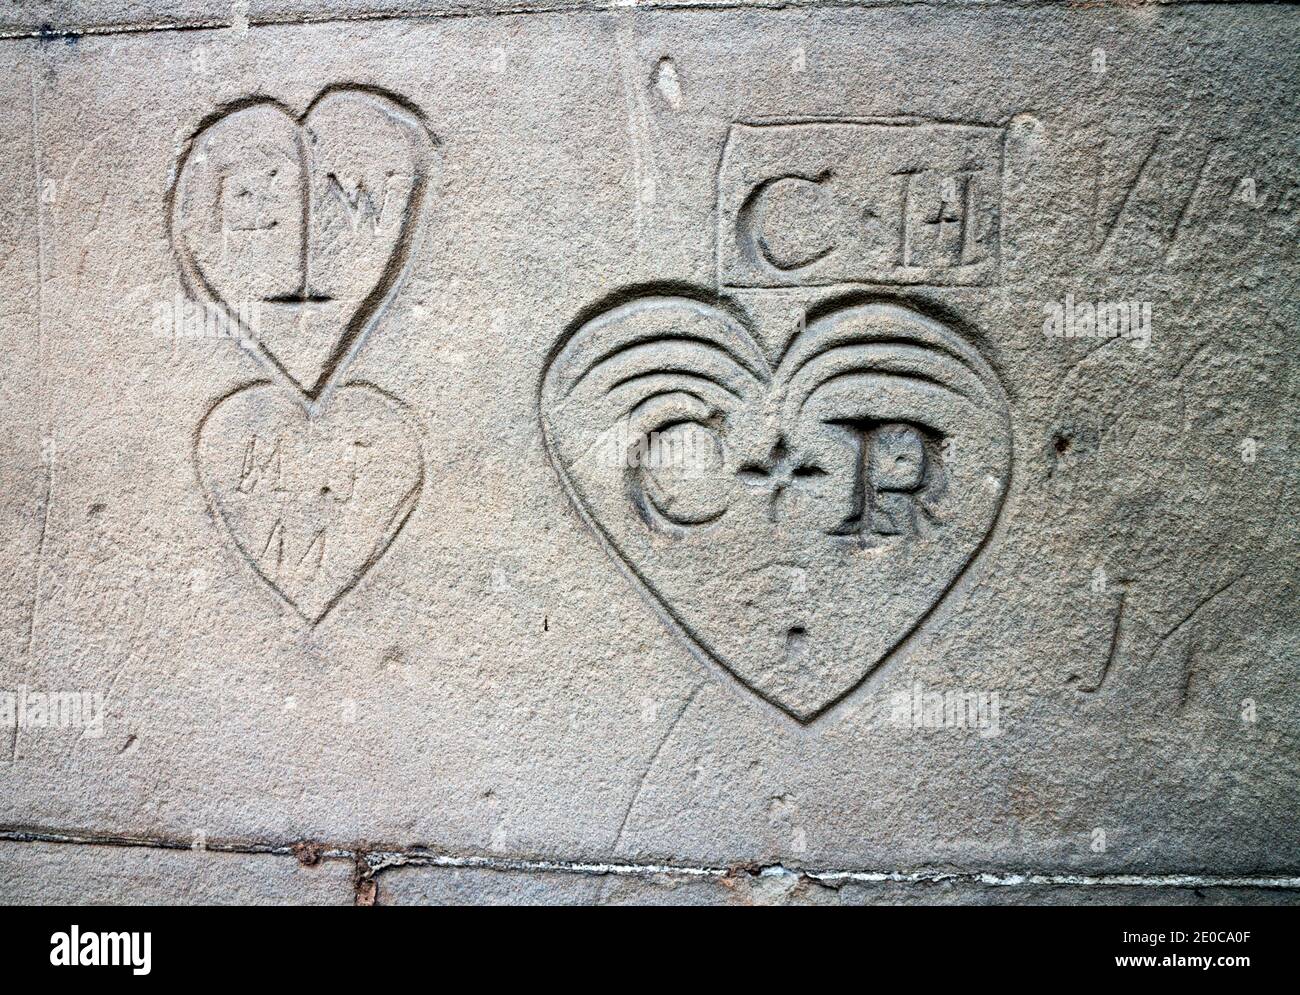 Sandstone wall with carved initials and hearts Stock Photo